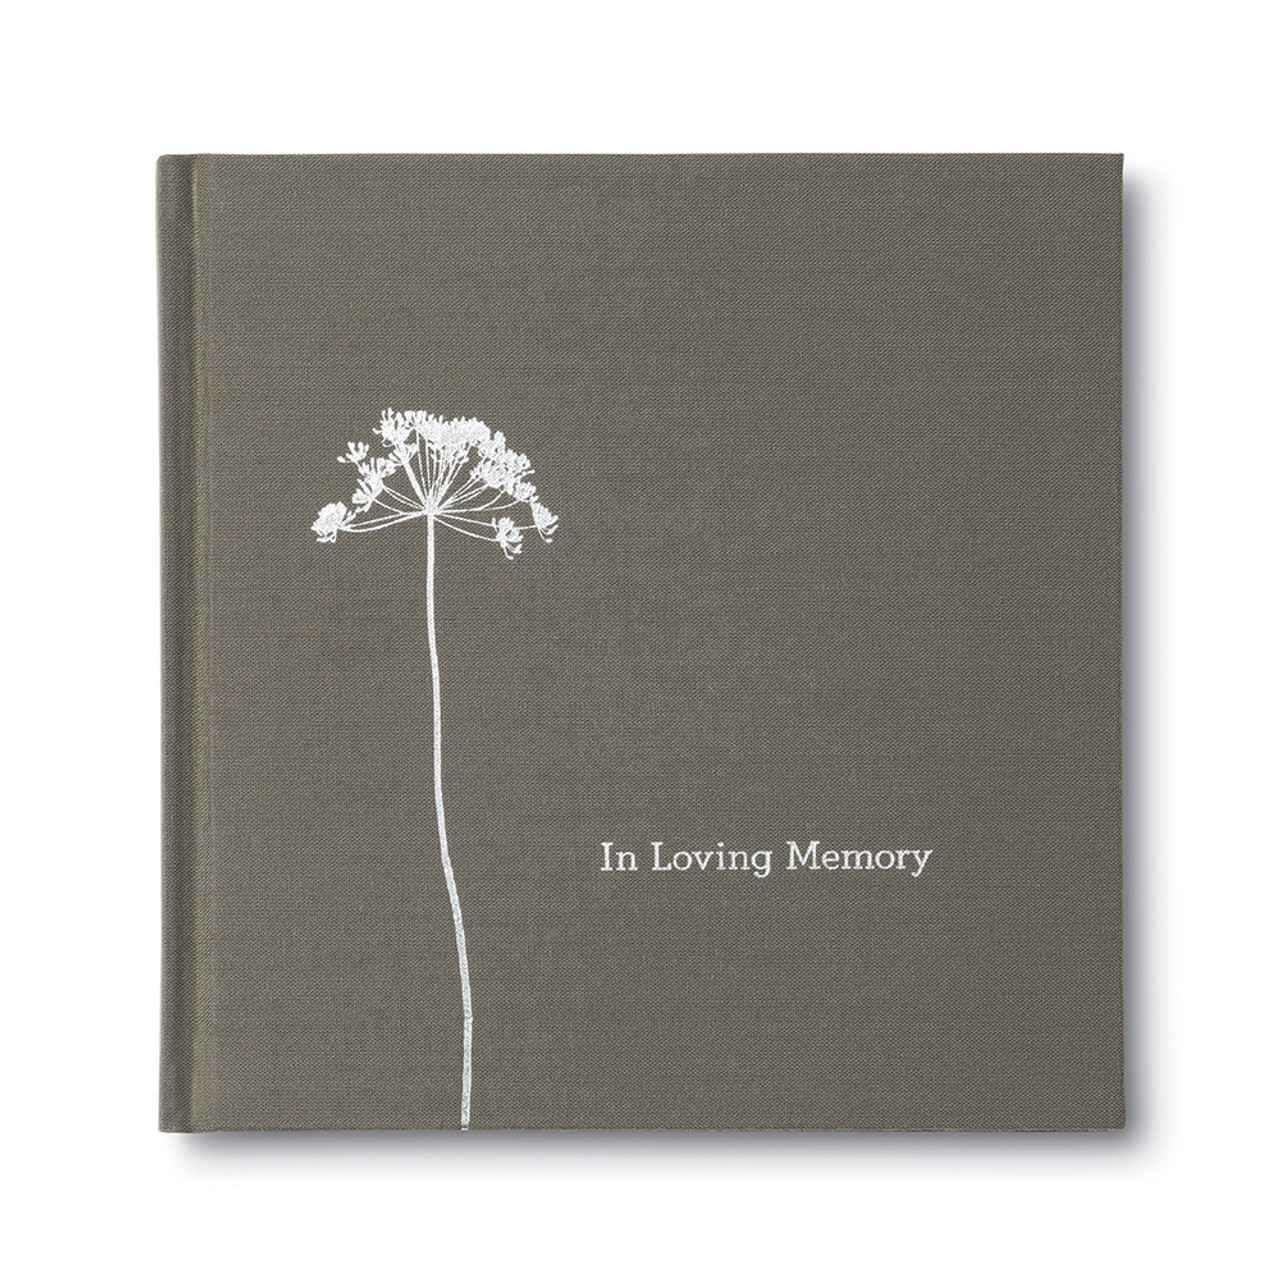 in loving memory background images